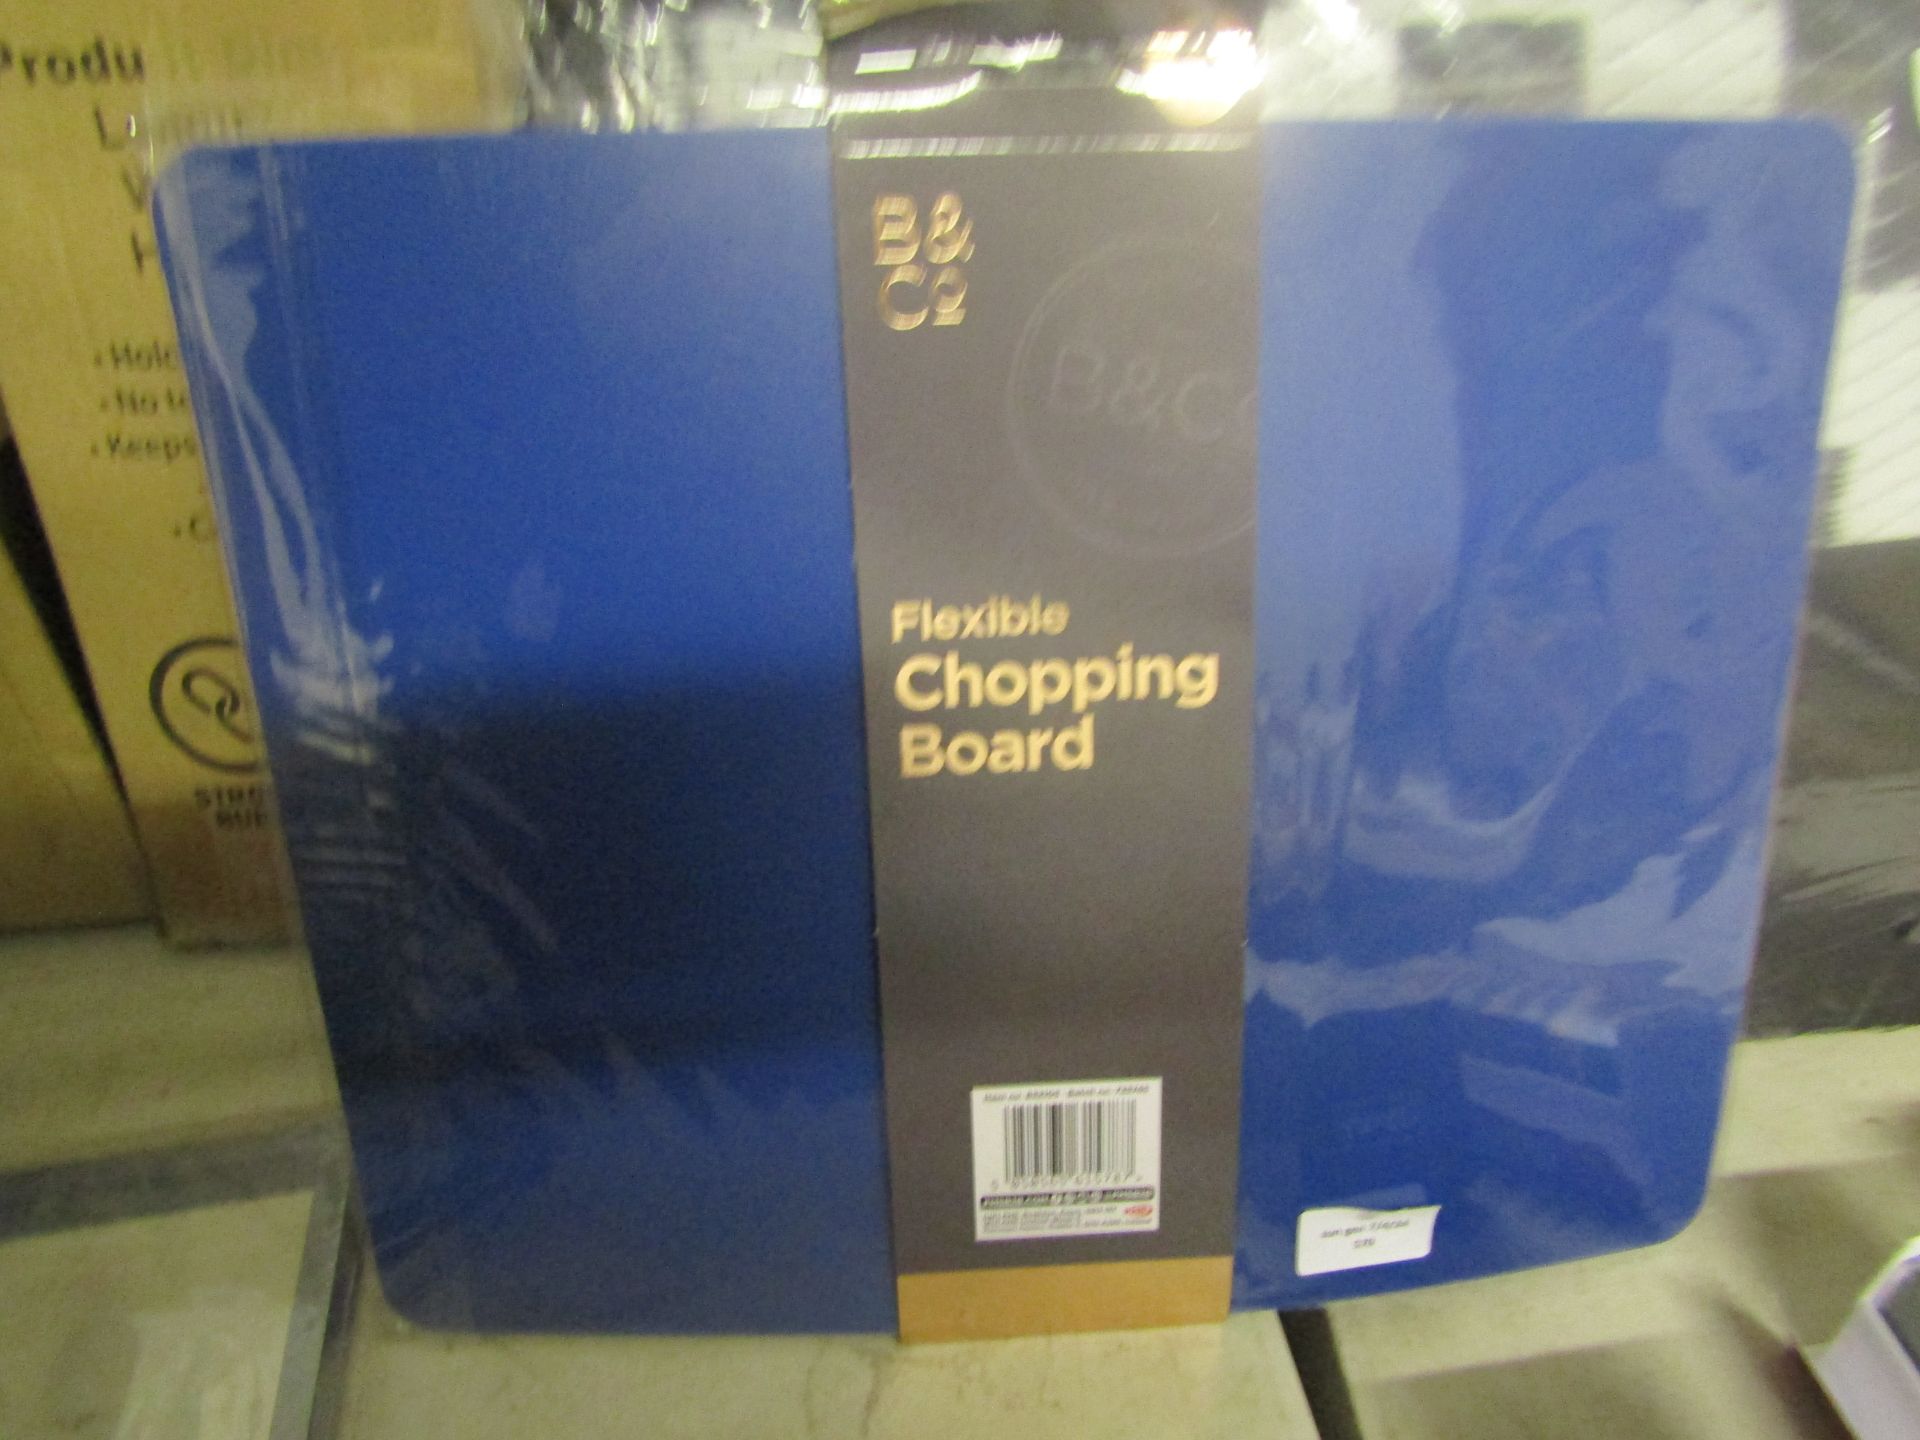 B &CO Flexible Chopping Board, Unchecked & Packaged.